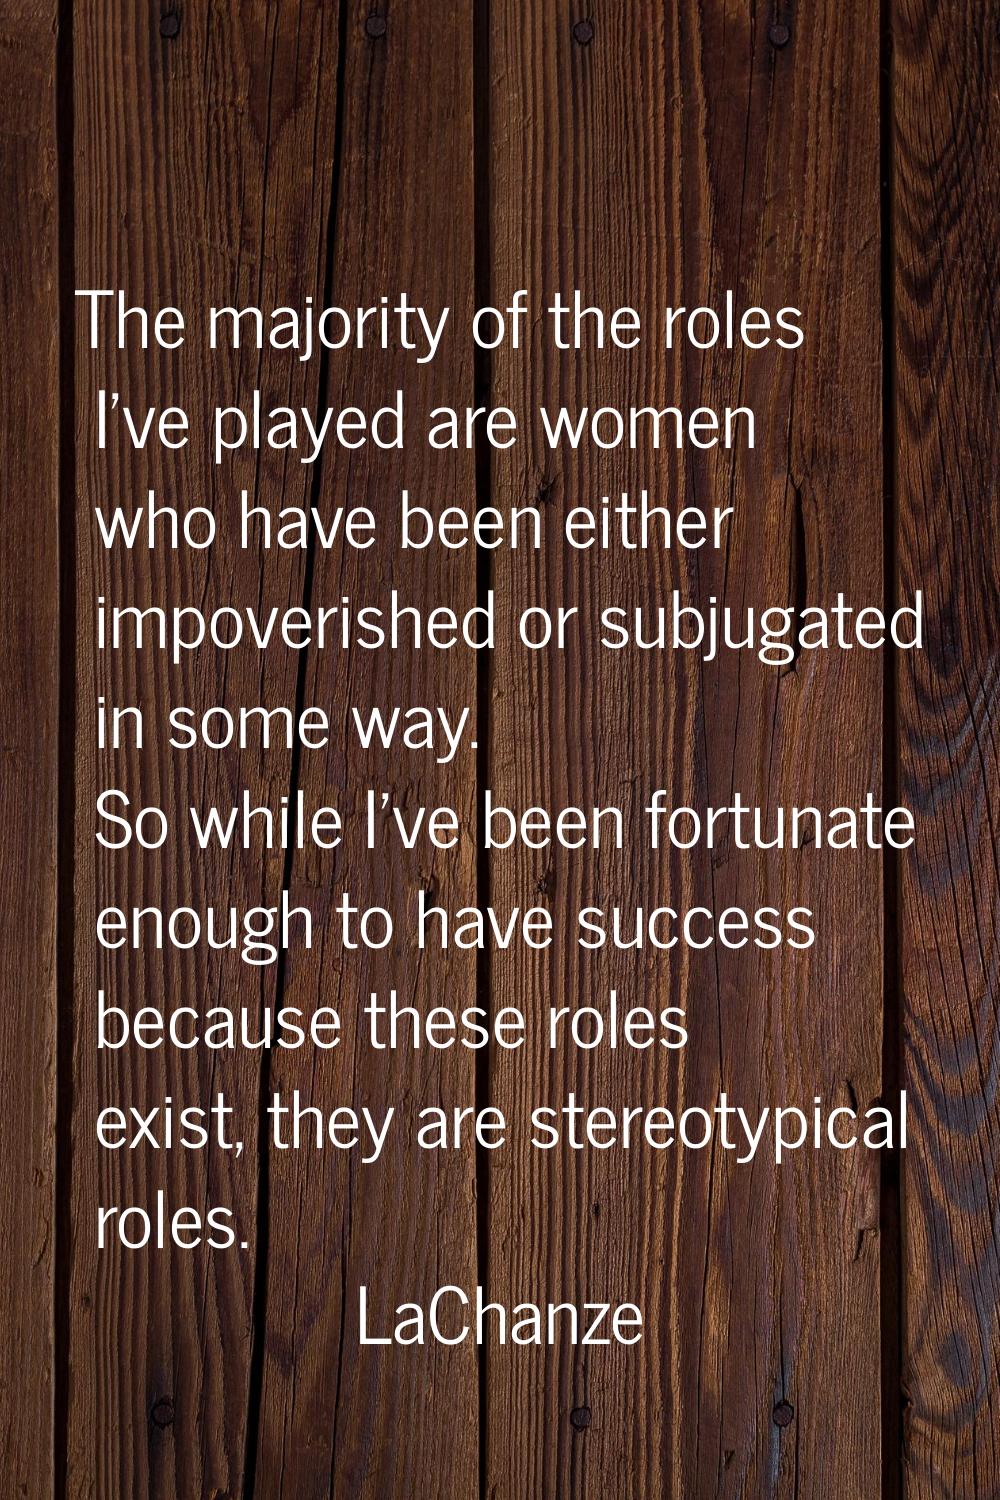 The majority of the roles I've played are women who have been either impoverished or subjugated in 